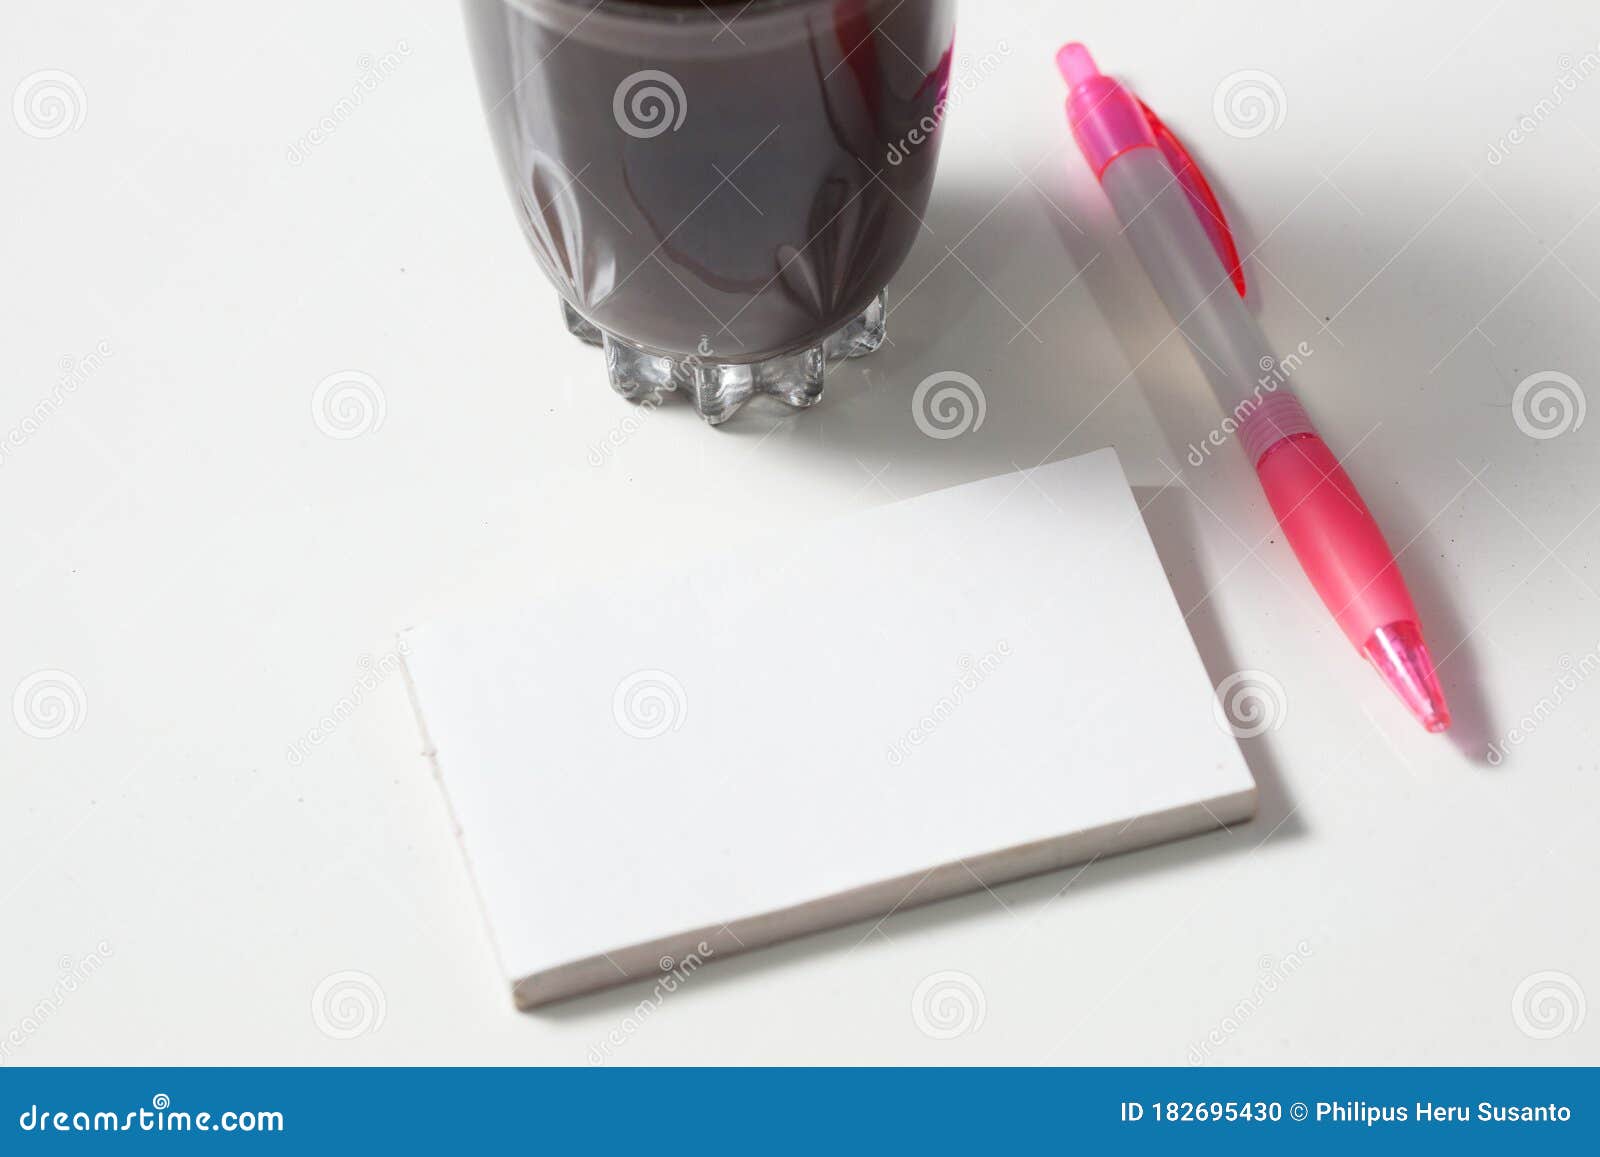 blank memopad on white background with negative space